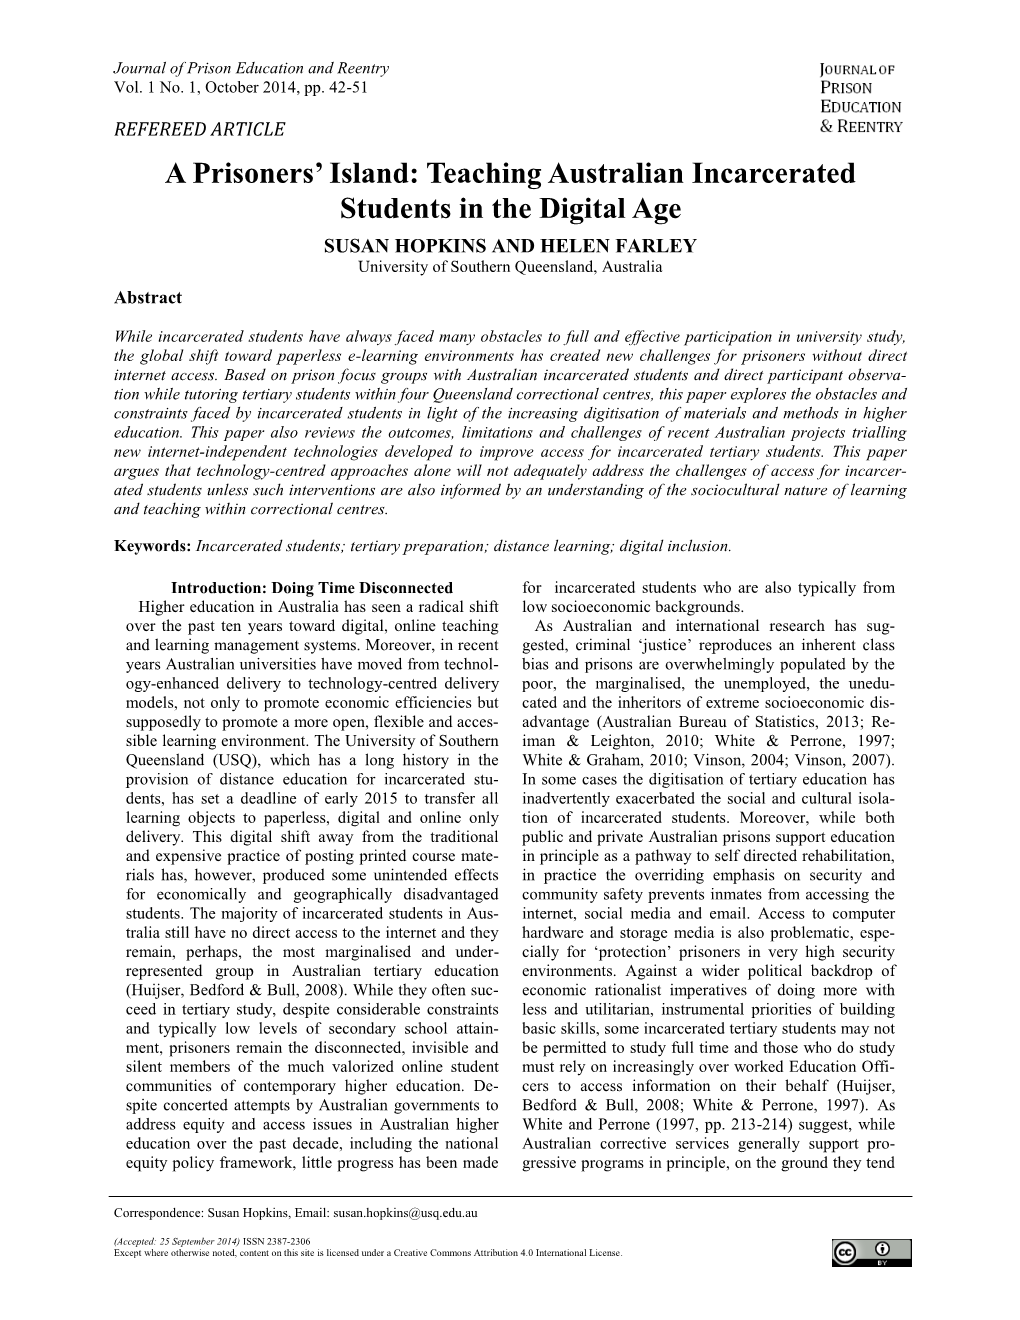 Teaching Australian Incarcerated Students in the Digital Age SUSAN HOPKINS and HELEN FARLEY University of Southern Queensland, Australia Abstract